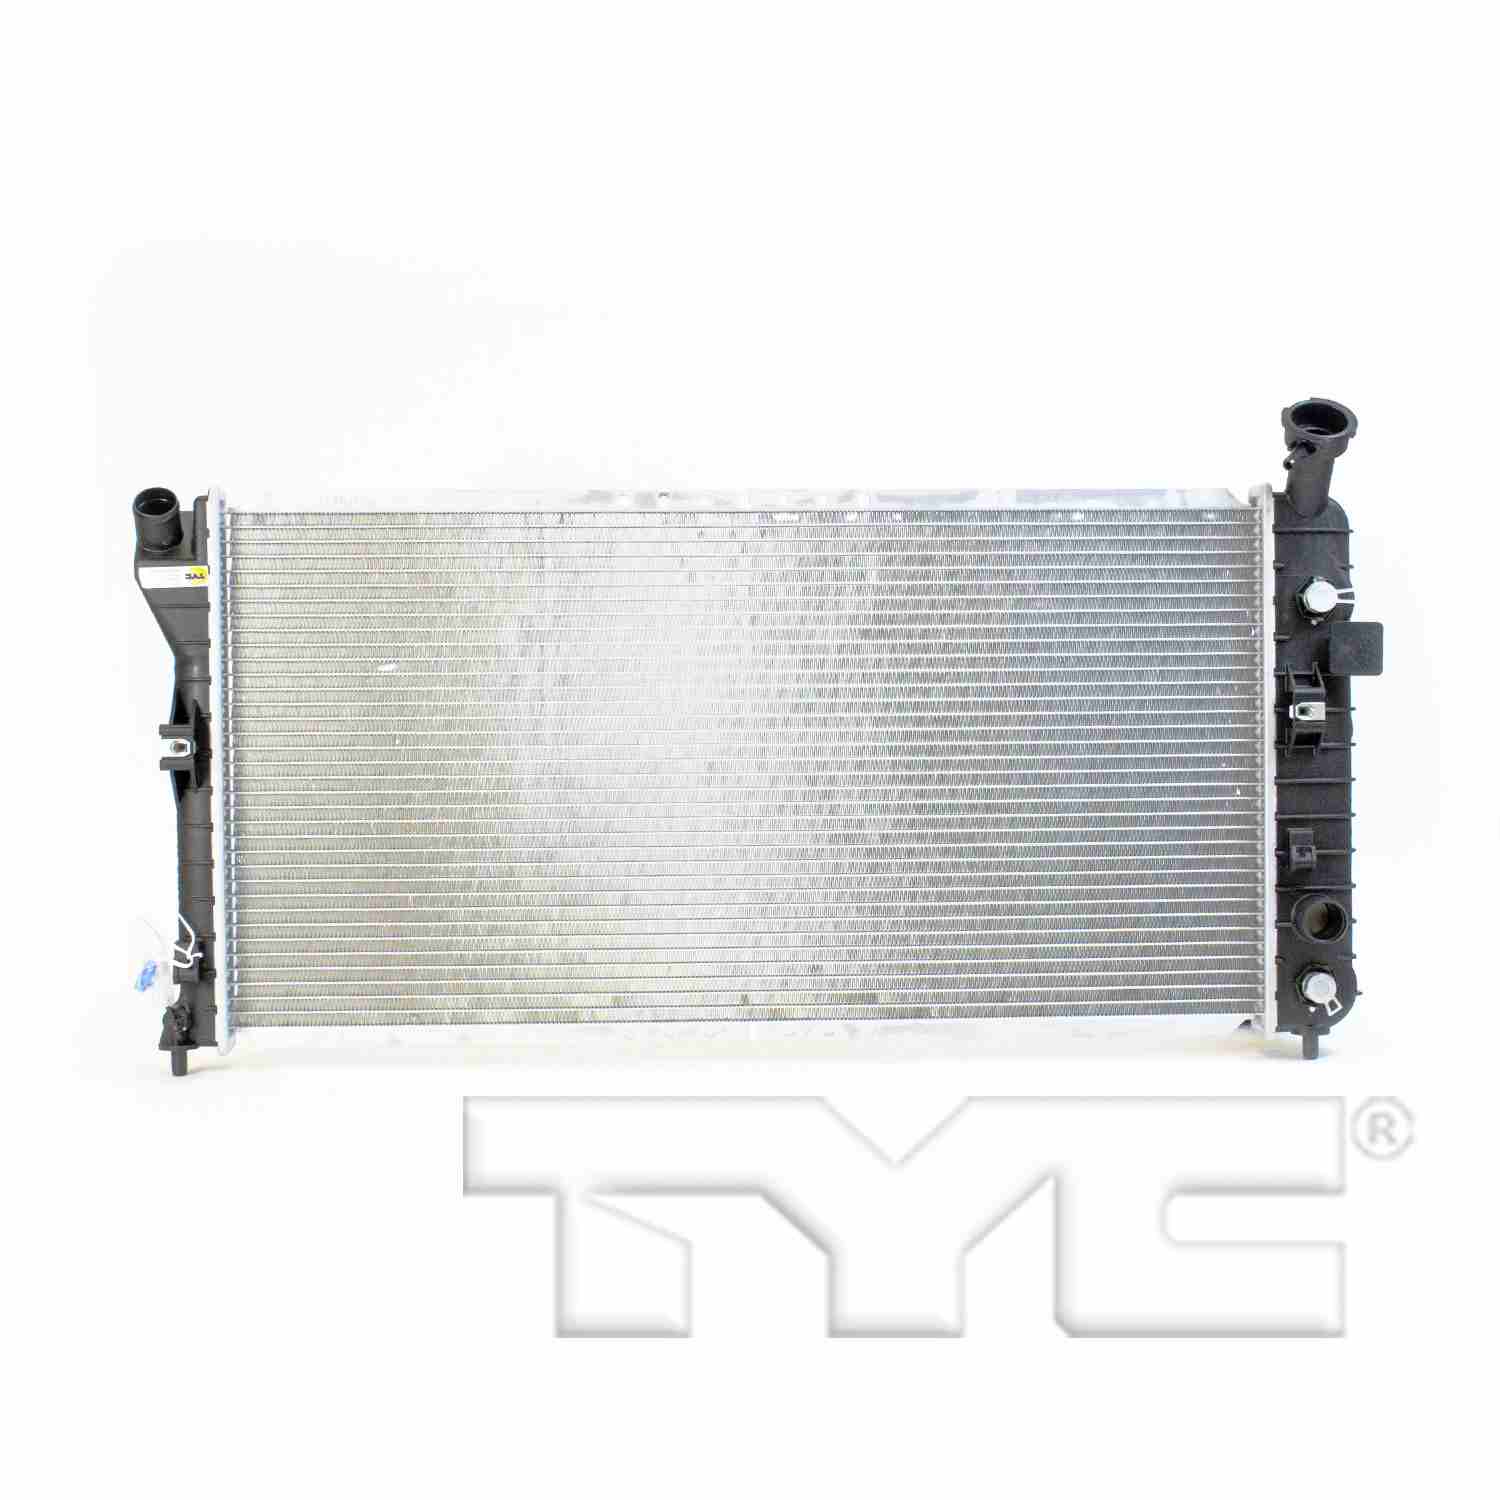 Front View of Radiator TYC 2343